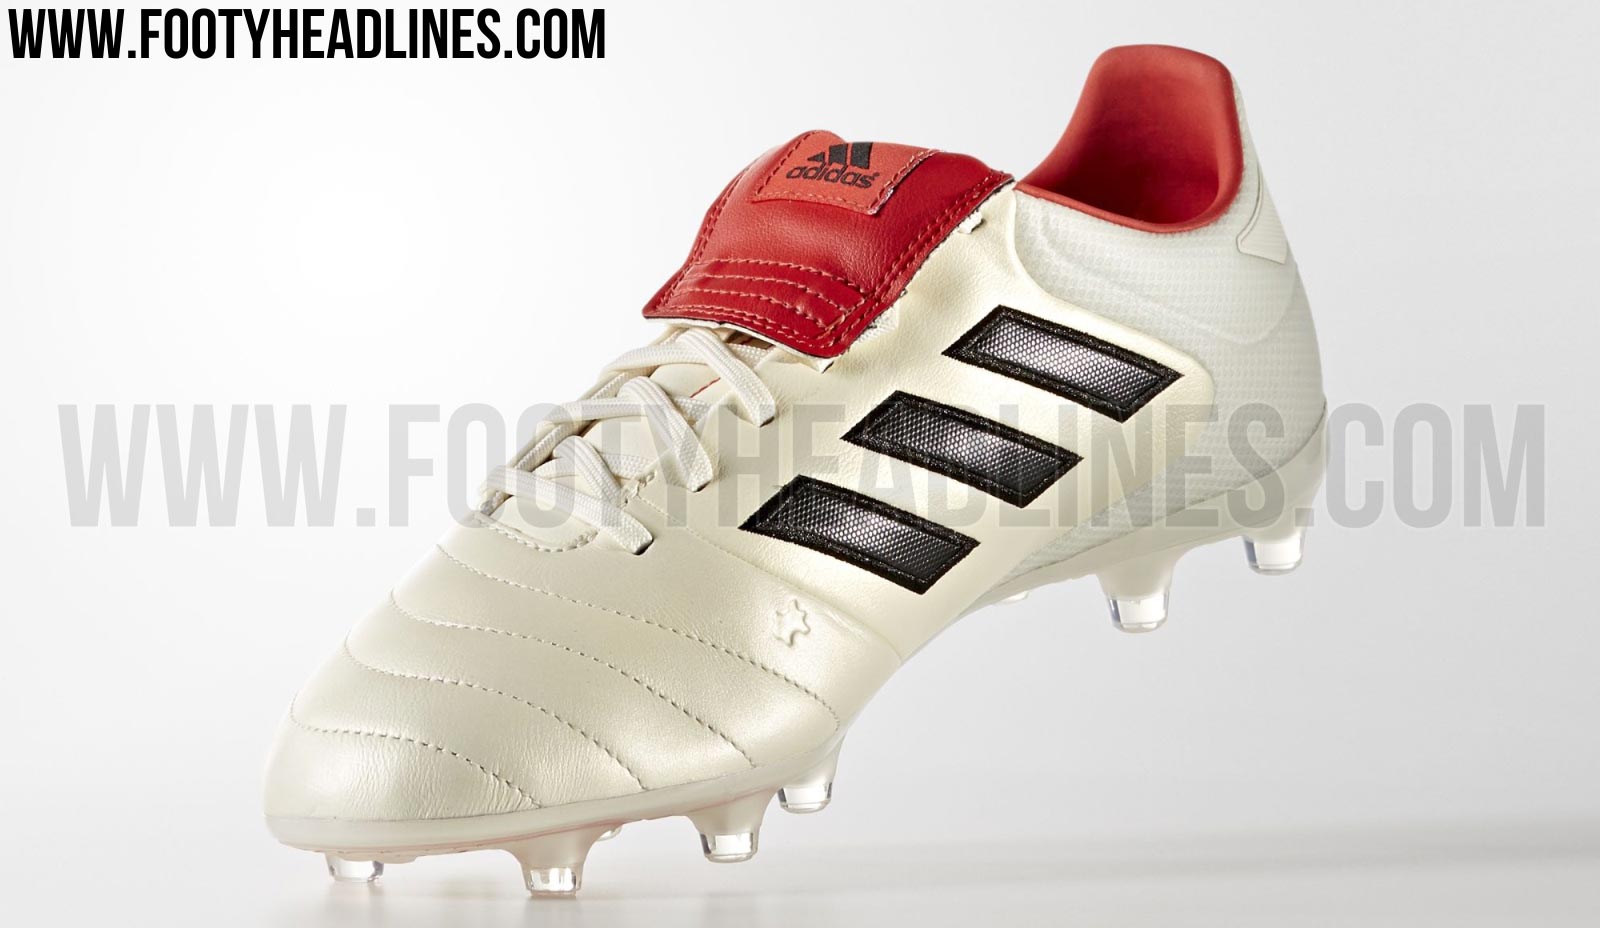 Limited-Edition Adidas 17.2 Champagne Revealed Footy Headlines